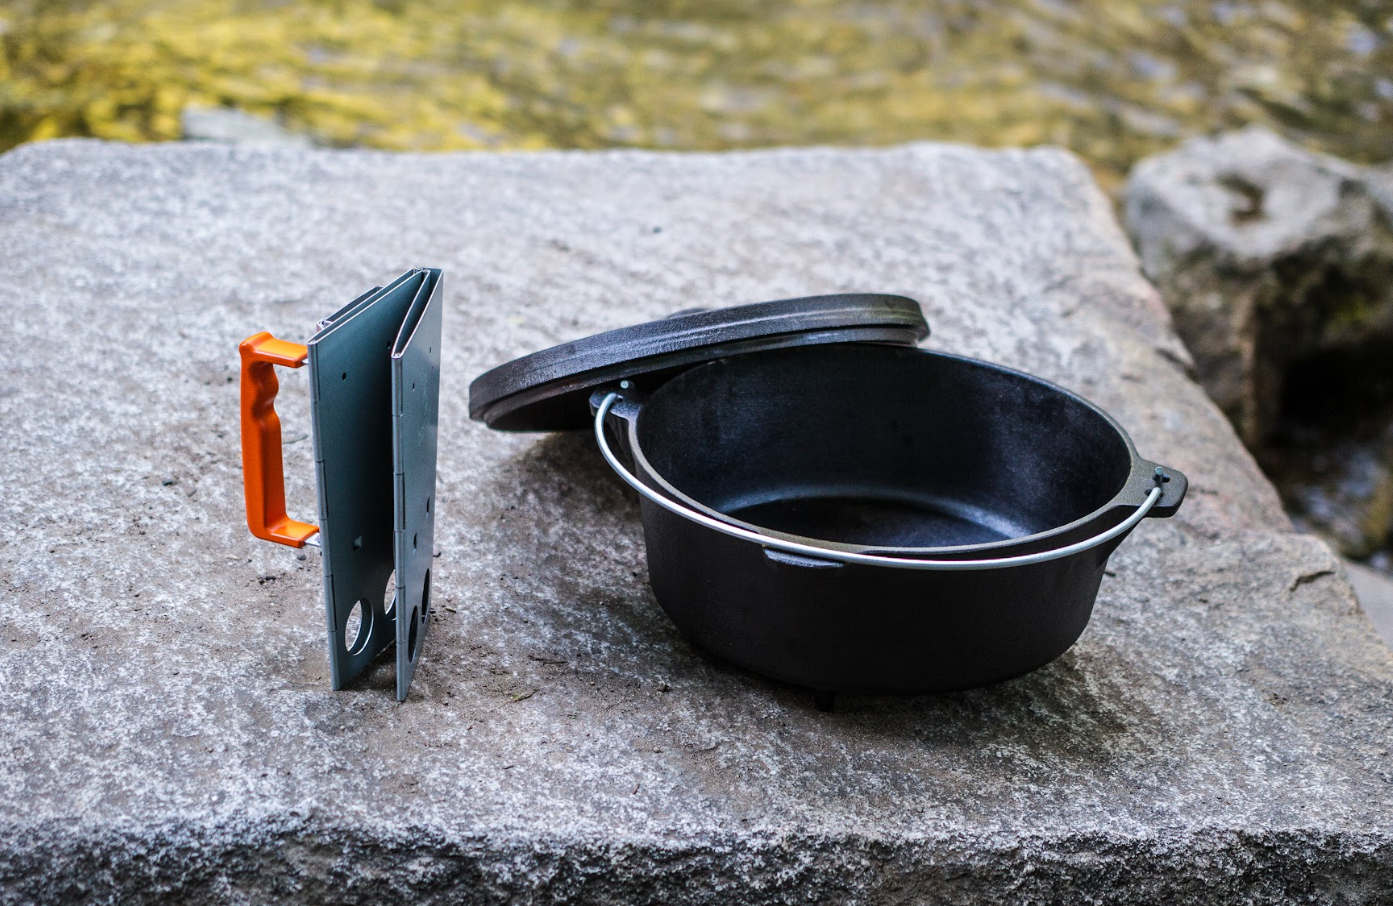 4 Tips for Using a Dutch Oven to get the Best Results